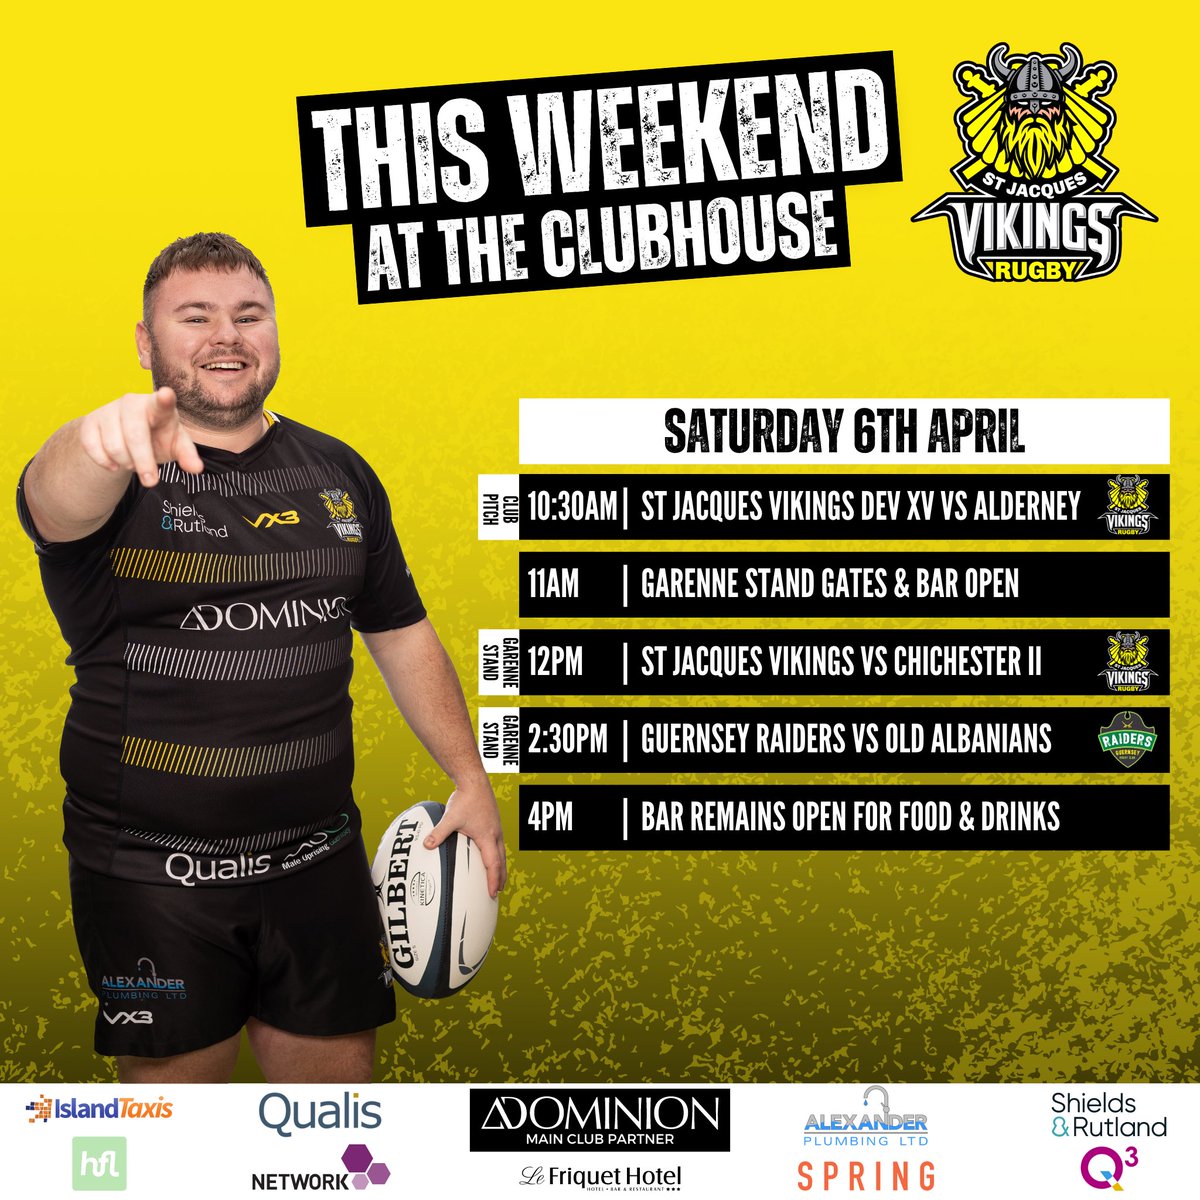 What a great Saturday there is in store at Footes Lane for our One United Fixture in partnership with @guernseyraiders! 🏉There are 3️⃣ live matches to enjoy With great drinks & food available, make Footes Lane the place to spend your Saturday! ⚫️🟡 #𝙏𝙃𝙀𝙑𝙄𝙆𝙄𝙉𝙂𝙎𝙒𝘼𝙔